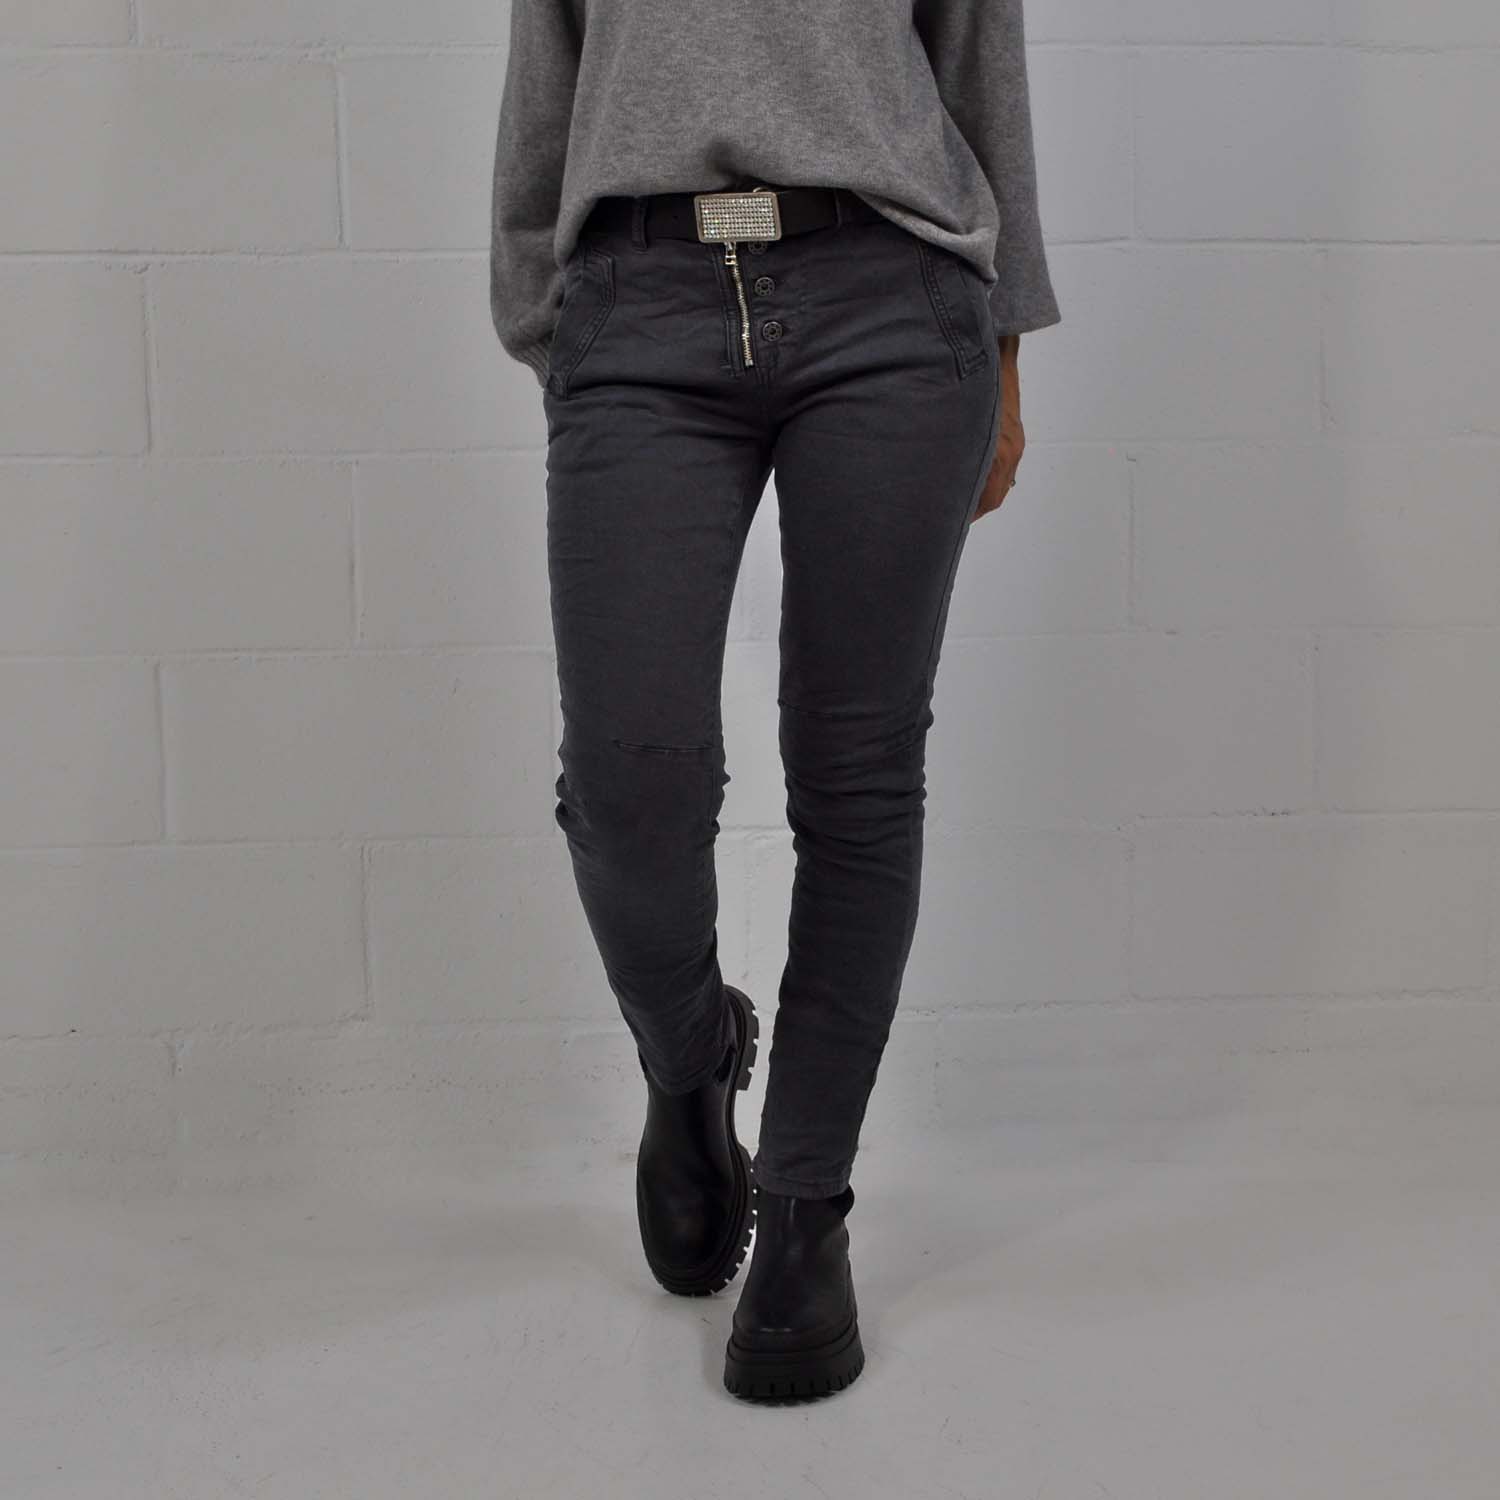 Gray zip and buttons pants